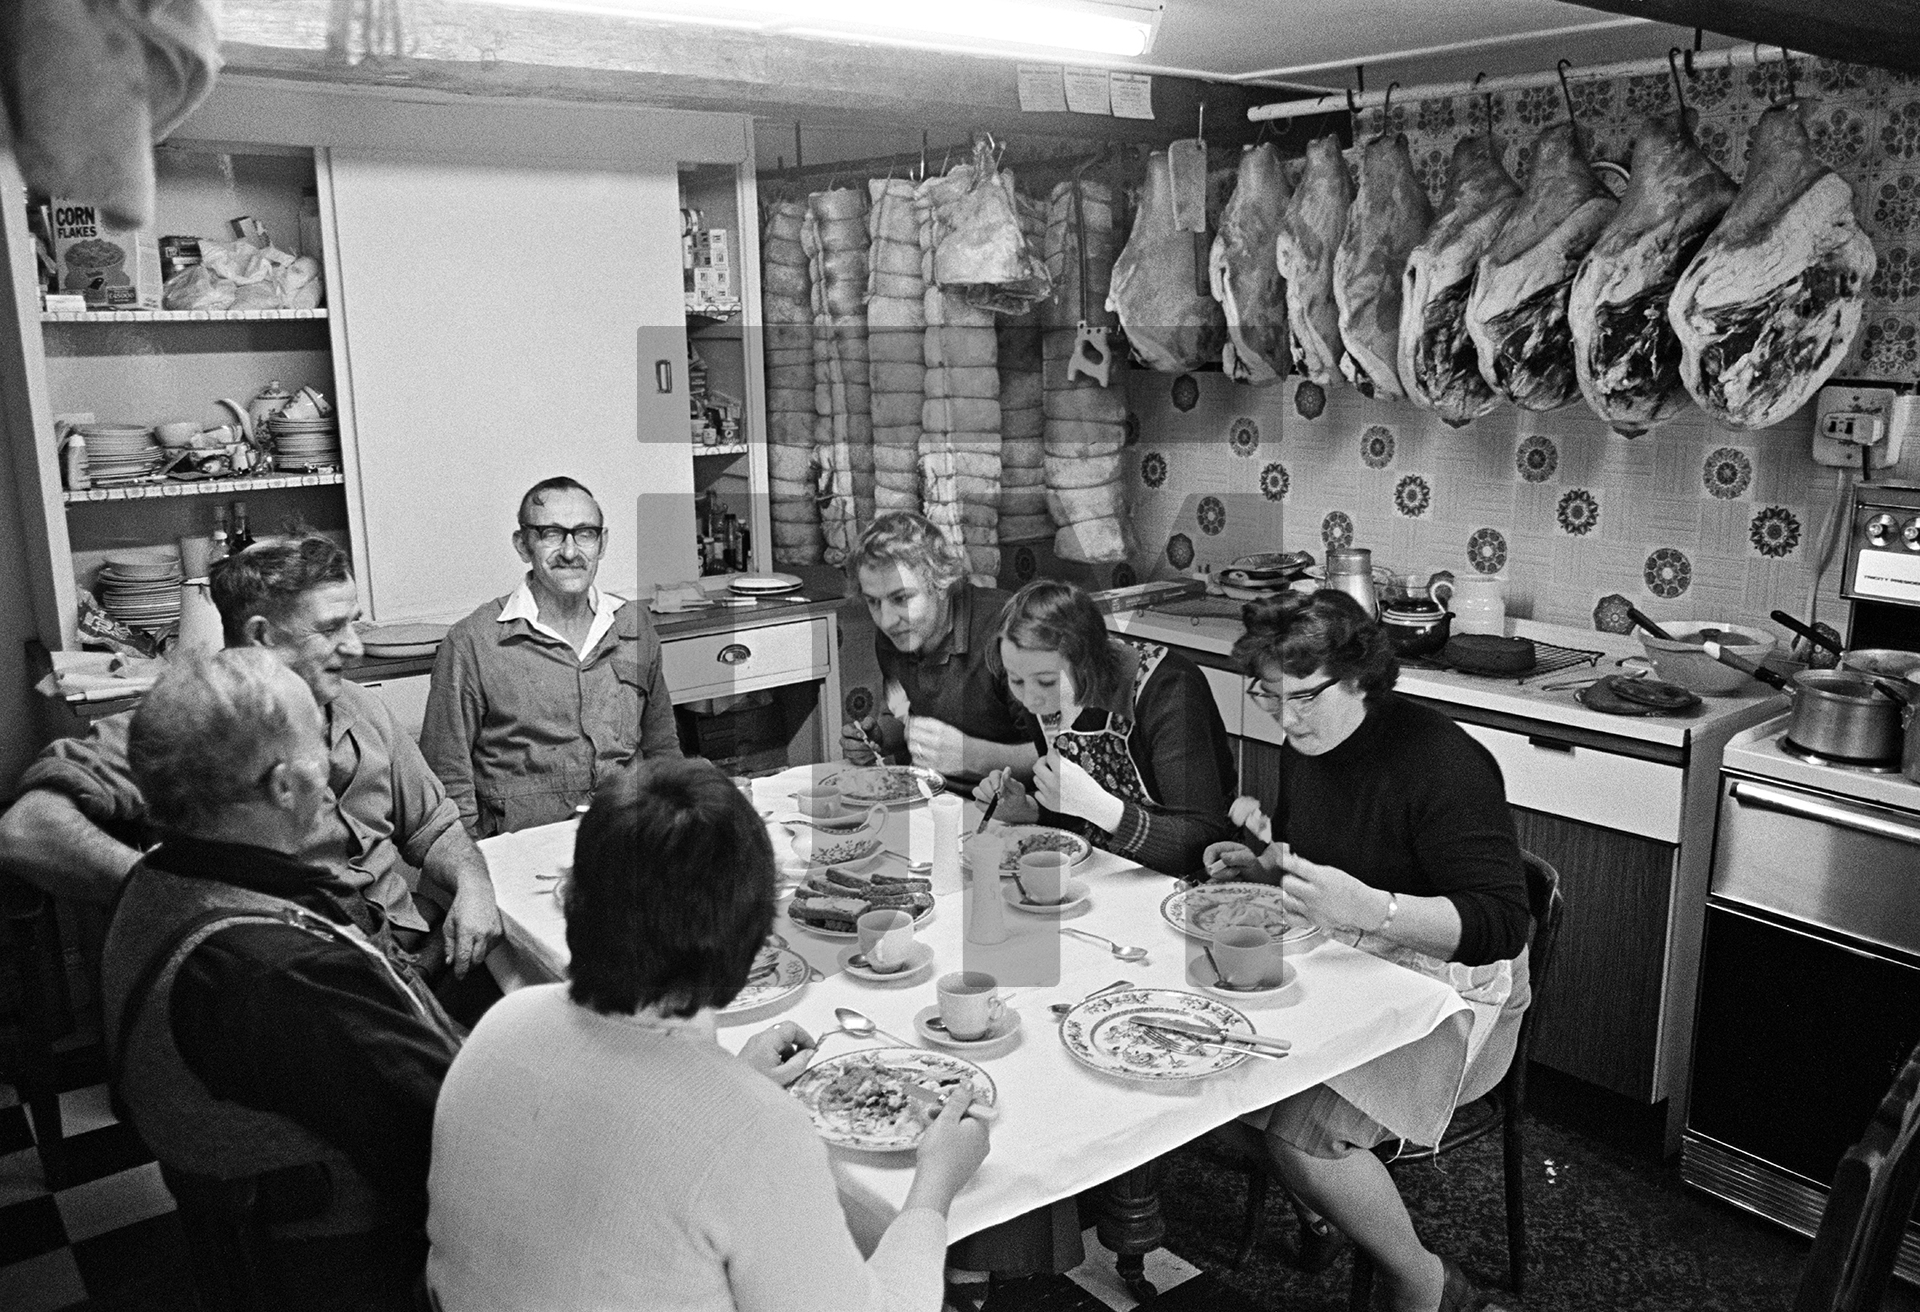 Farmhouse kitchen, lunch break on killing day. Cyril Richardson (arm over back of chair) and family. Old Farm, Little Stainton, near Skipton, North Yorkshire. December 1976 by Daniel Meadows